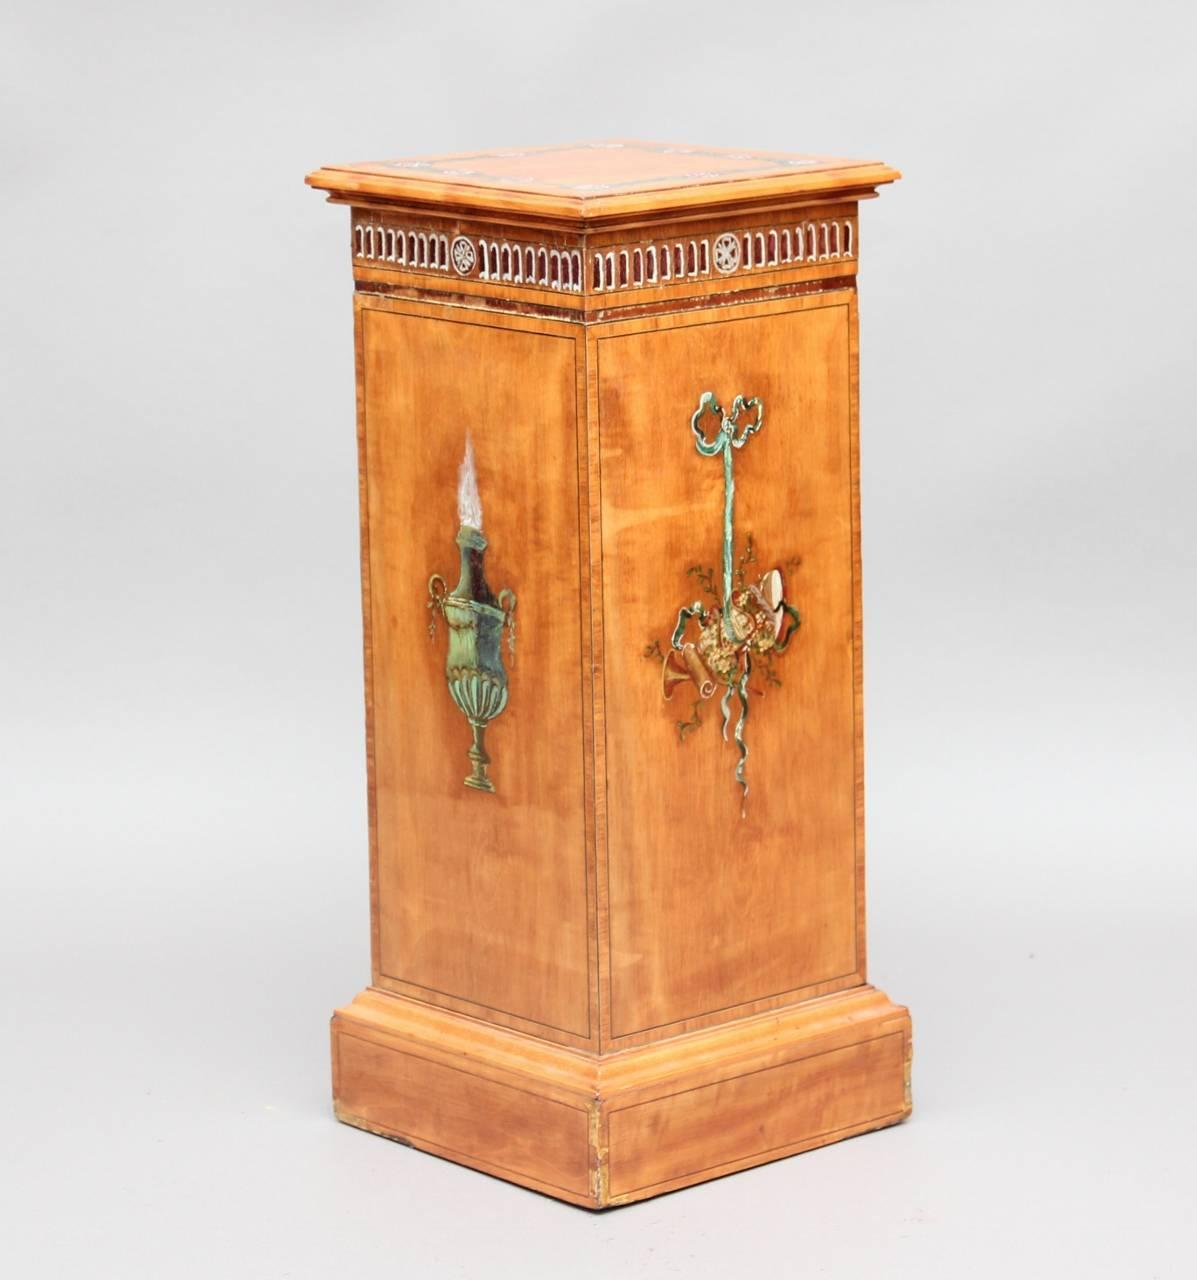 A nice decorative early 20th century satinwood painted pedestal in the style of Sheraton, circa 1910.

Areas of restored paint and losses to veneer.
Height: 24